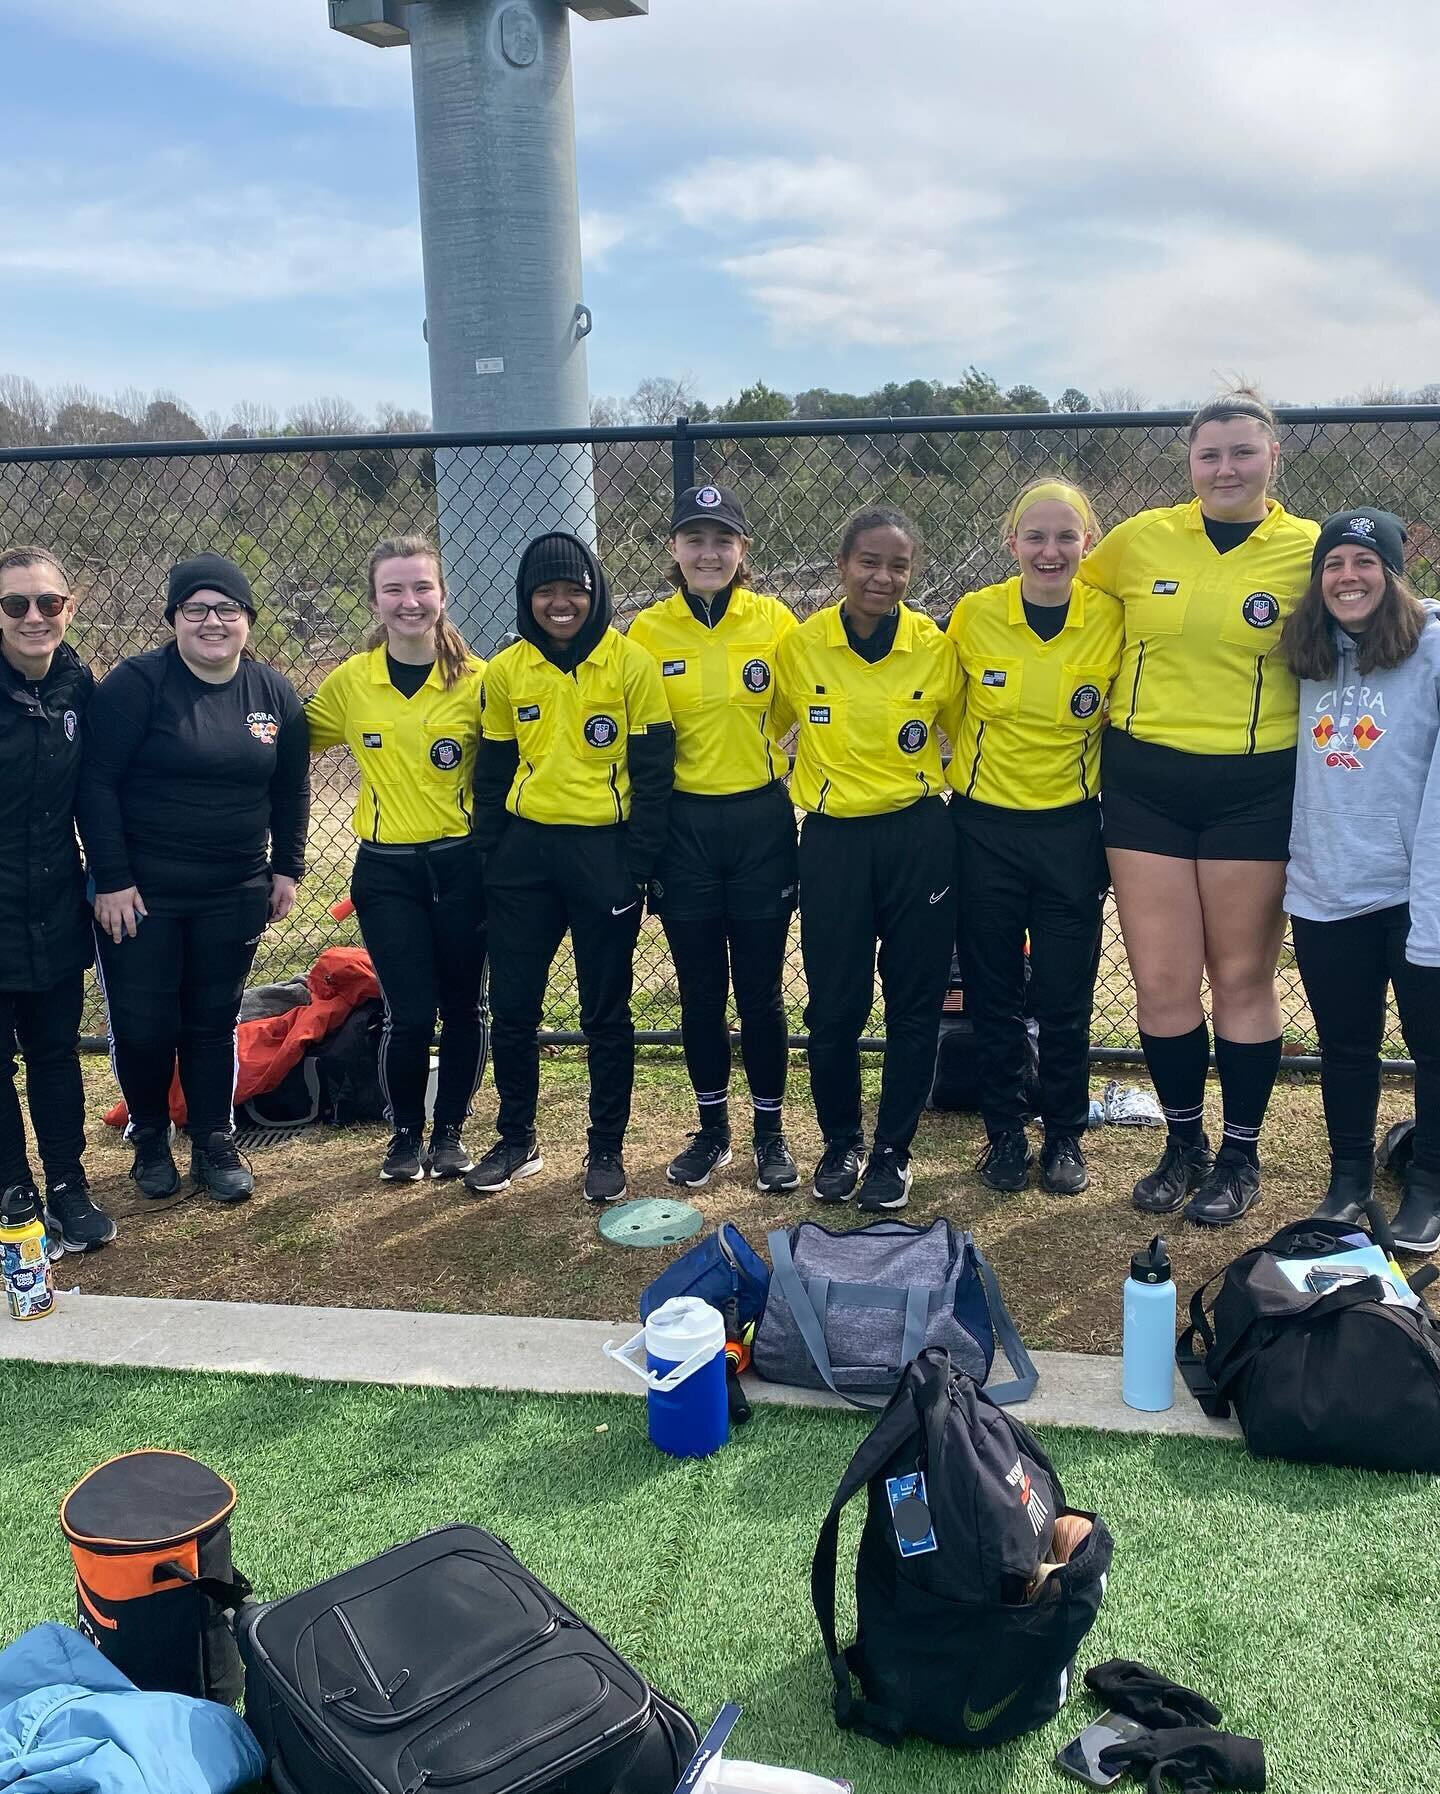 Kicking off the tournament season with a powerful start! 🌟 CVSRA hosted an inspiring all-female youth mentoring event alongside the Ultimate Cup. The Mentoring Event was a huge success in fostering confidence in our female youth referees. CVSRA is w